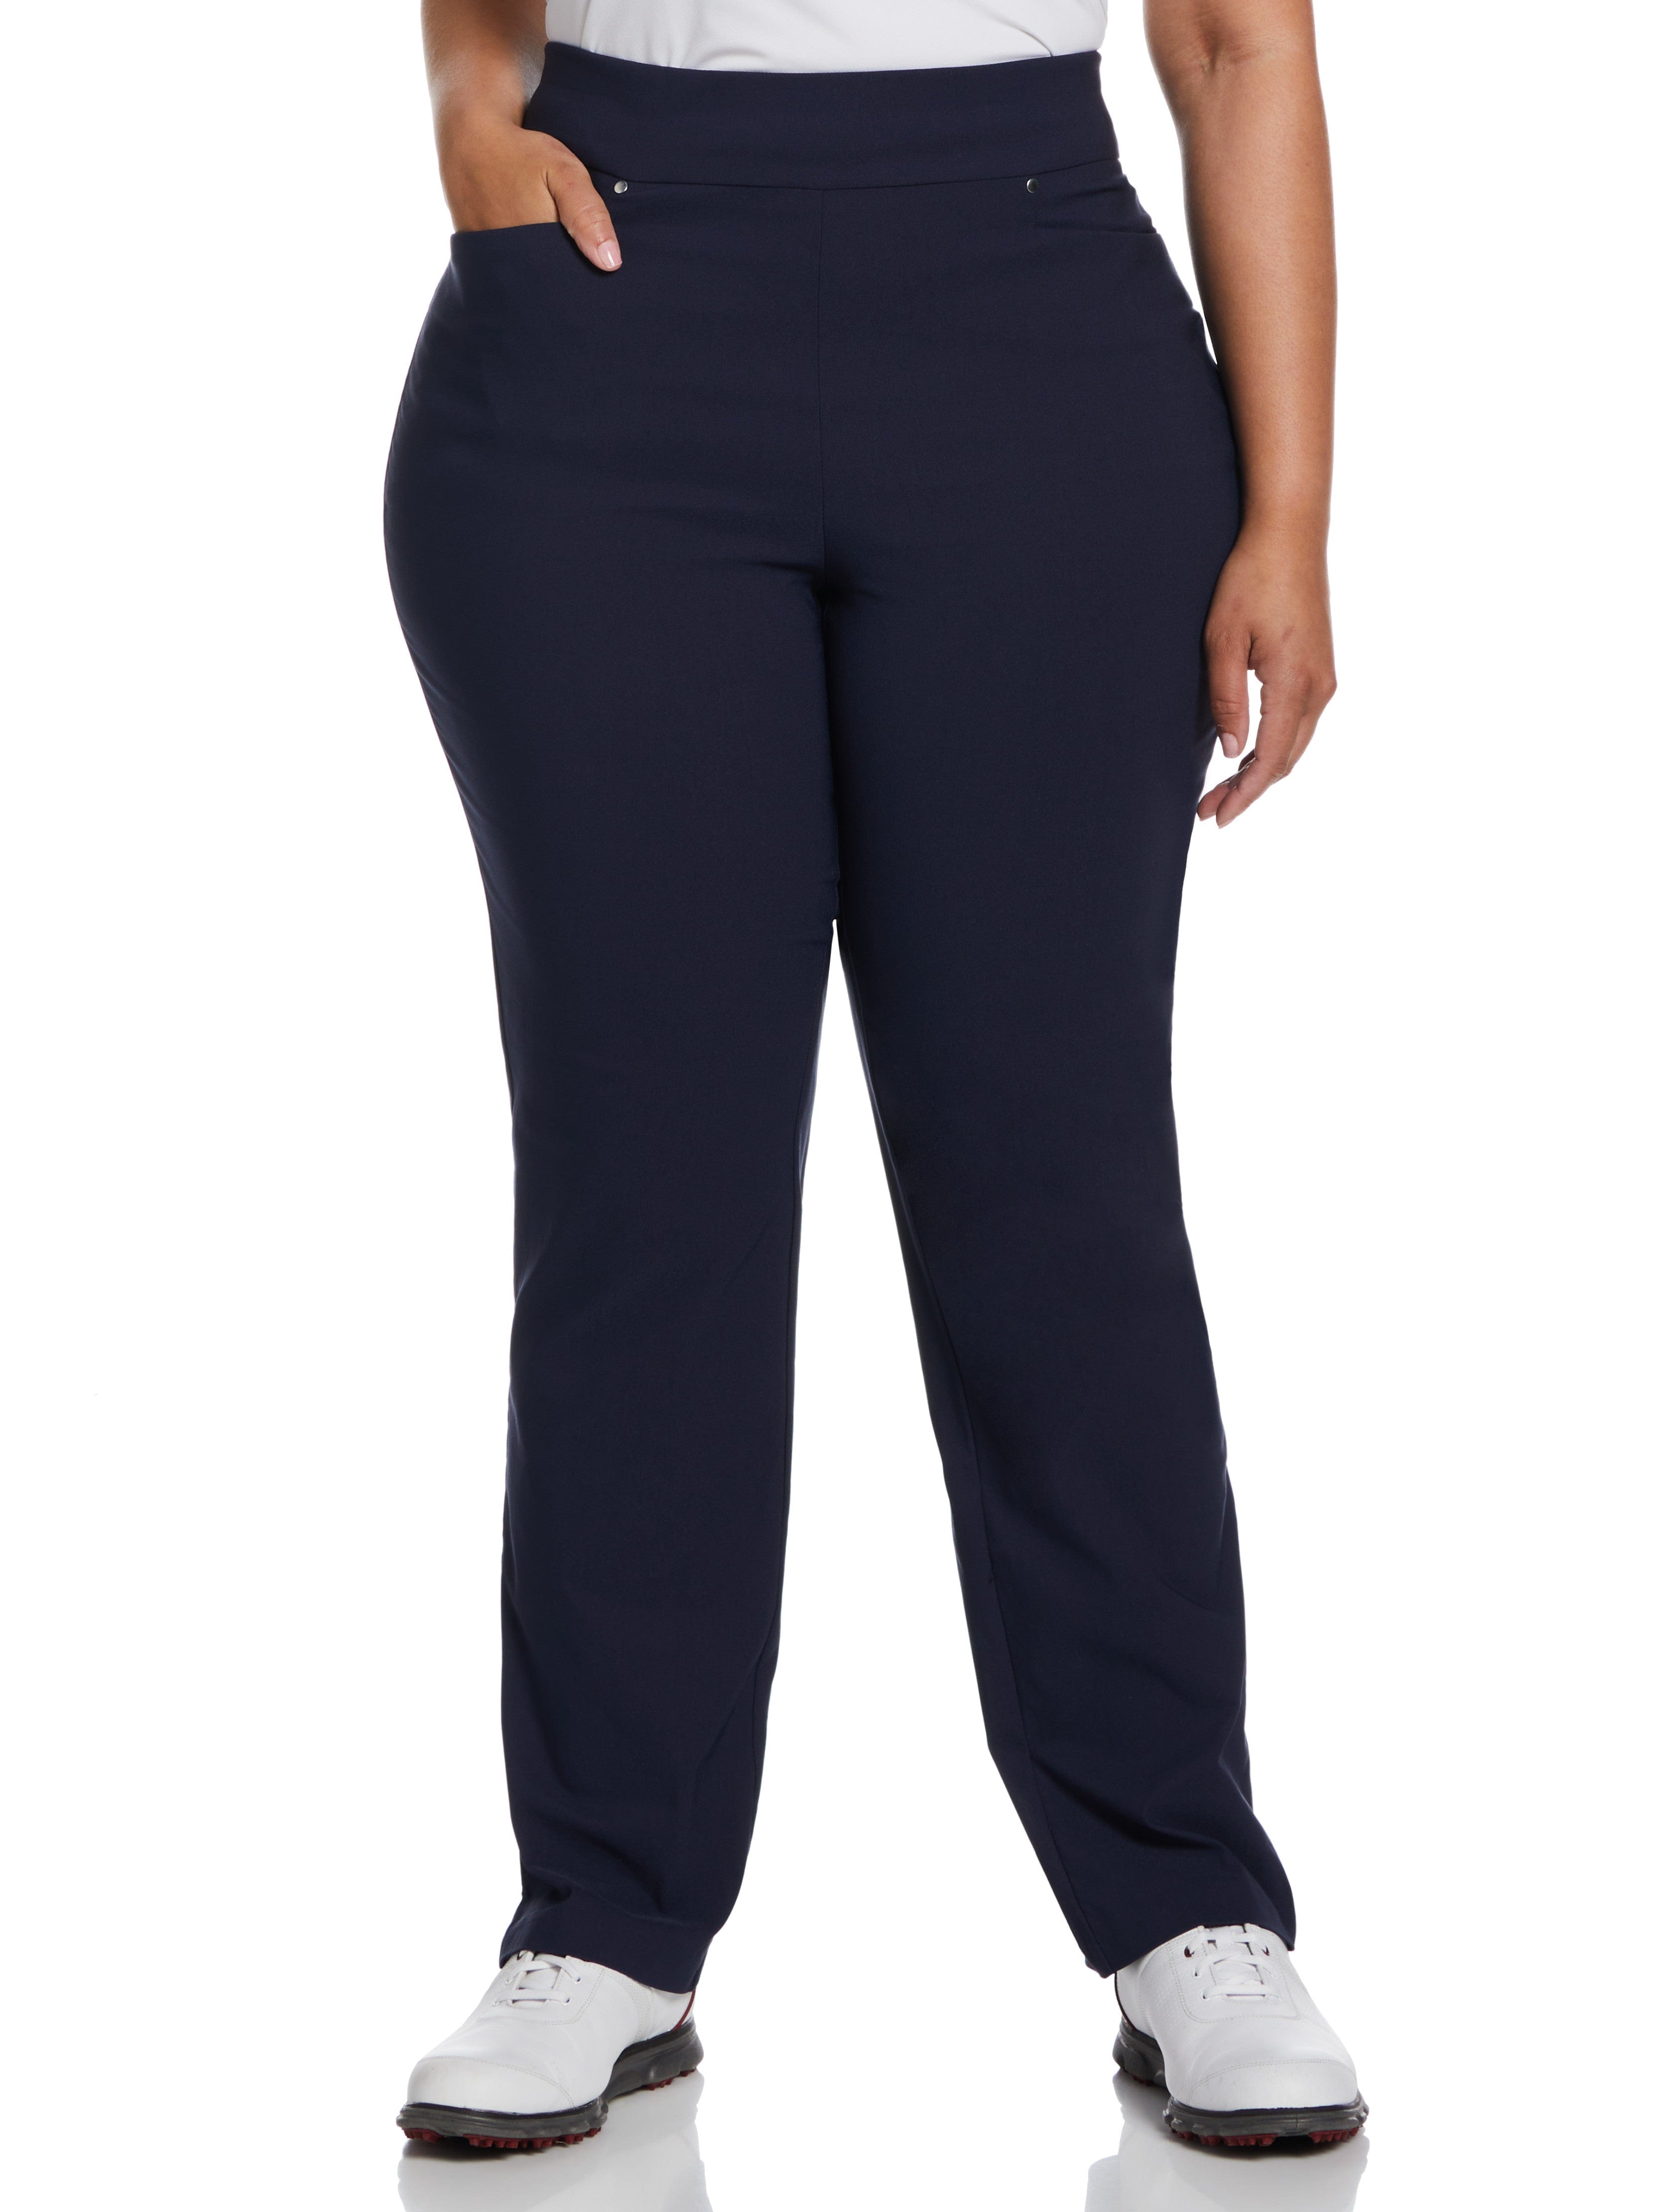 Plus-Size Pull-On Pants